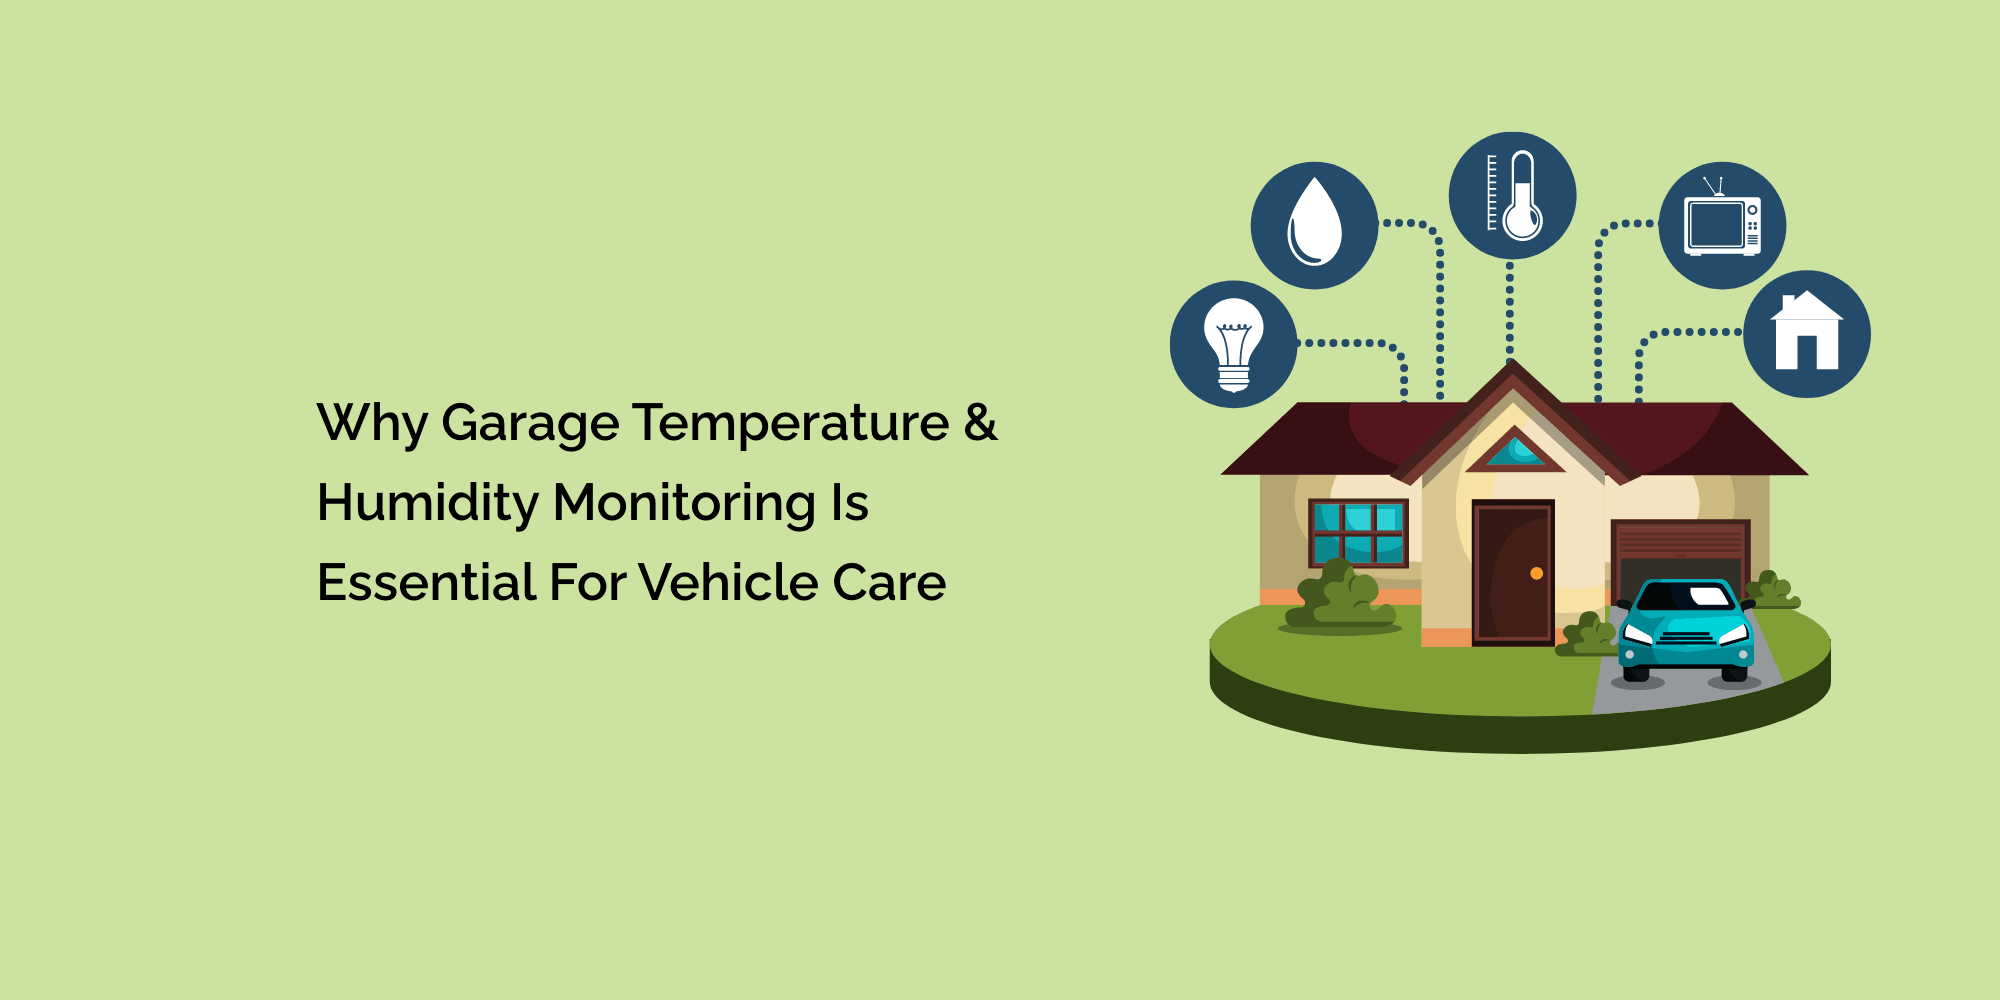 Why Garage Temperature and Humidity Monitoring is Essential for Vehicle Care